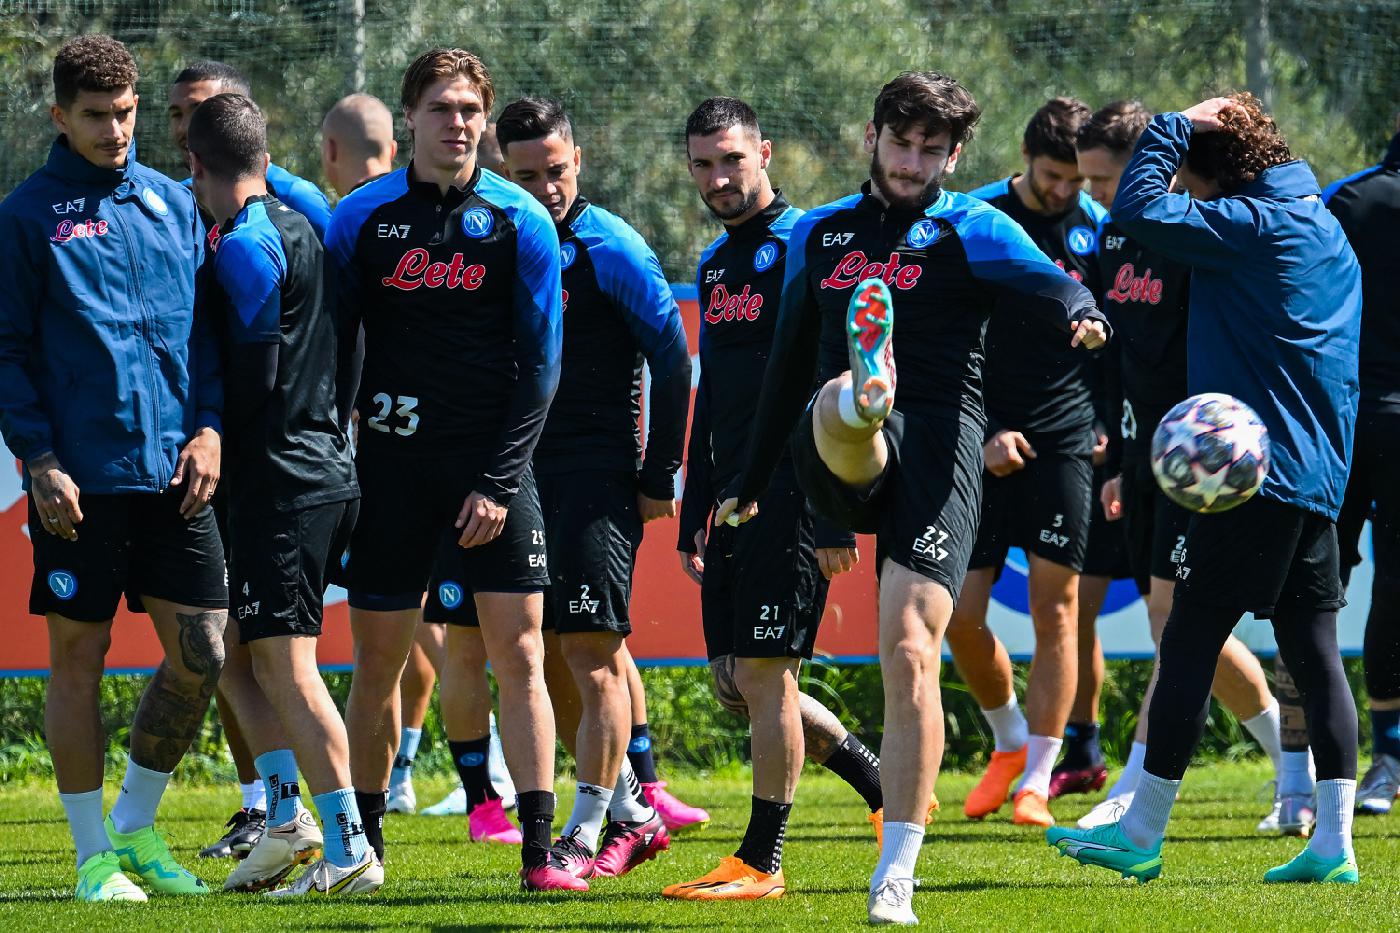 Milan - Napoli: where to watch, online broadcast (April 12)